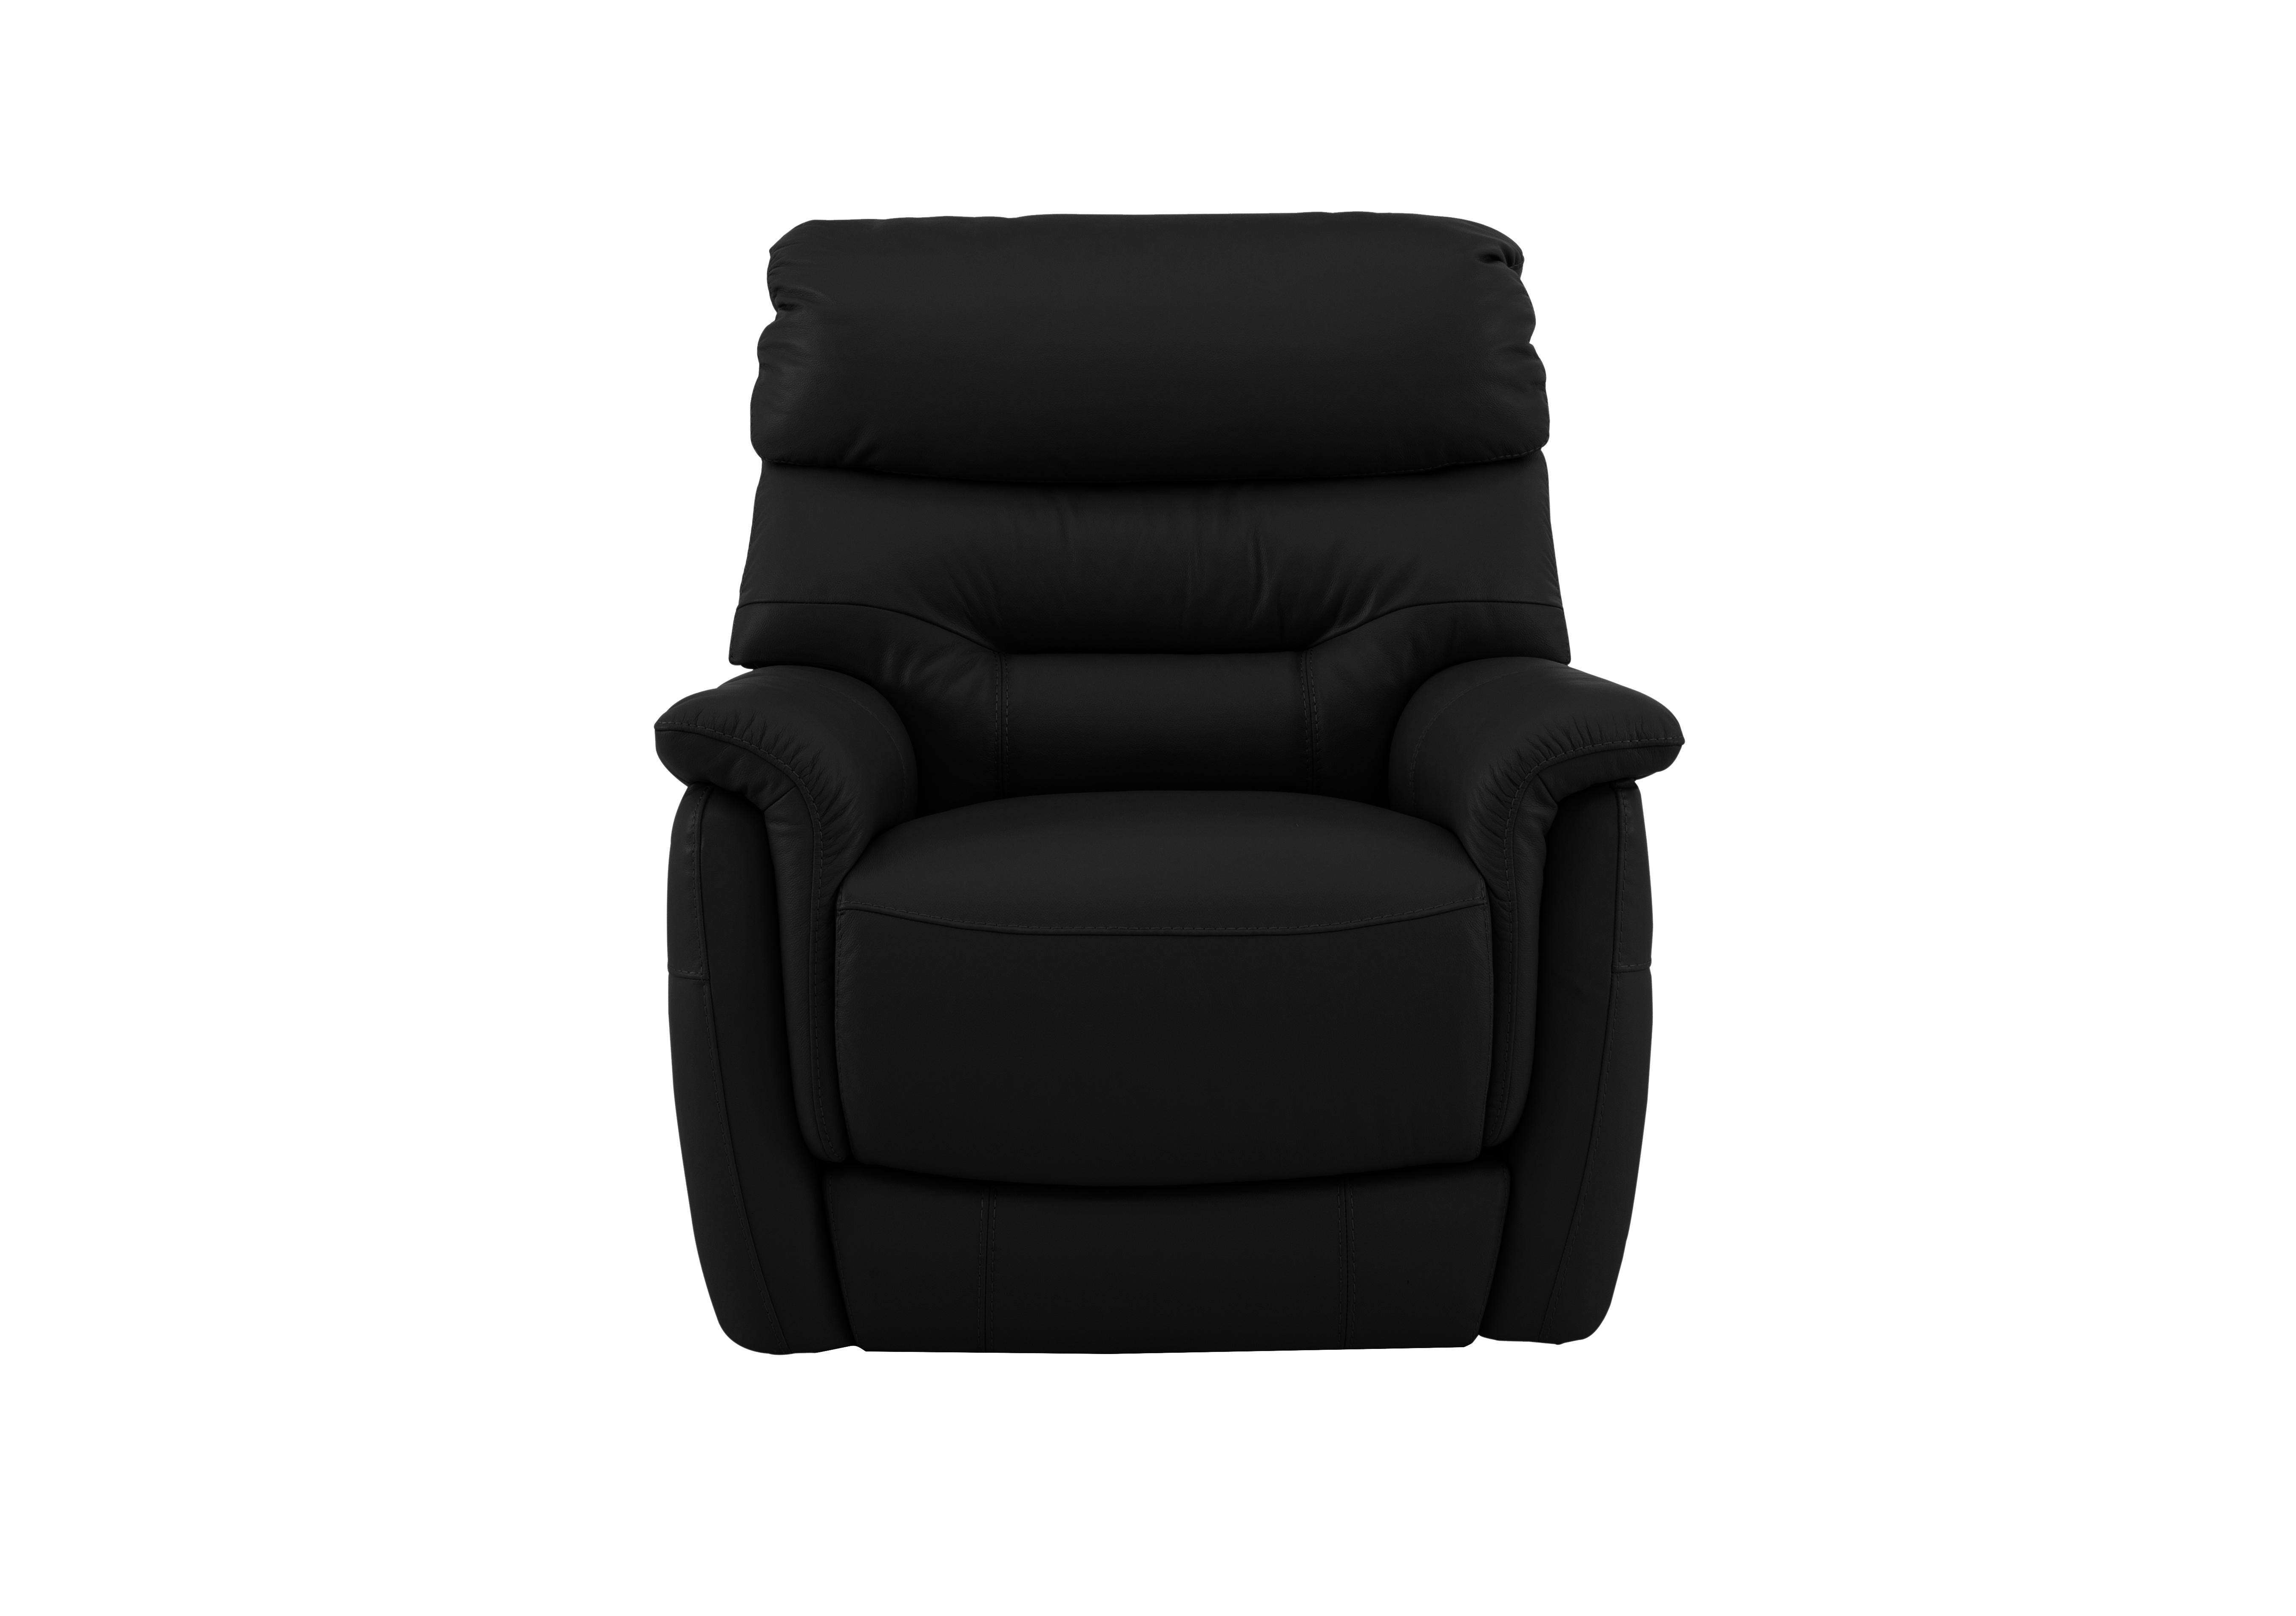 Chicago Leather Armchair in An-671b Black on Furniture Village